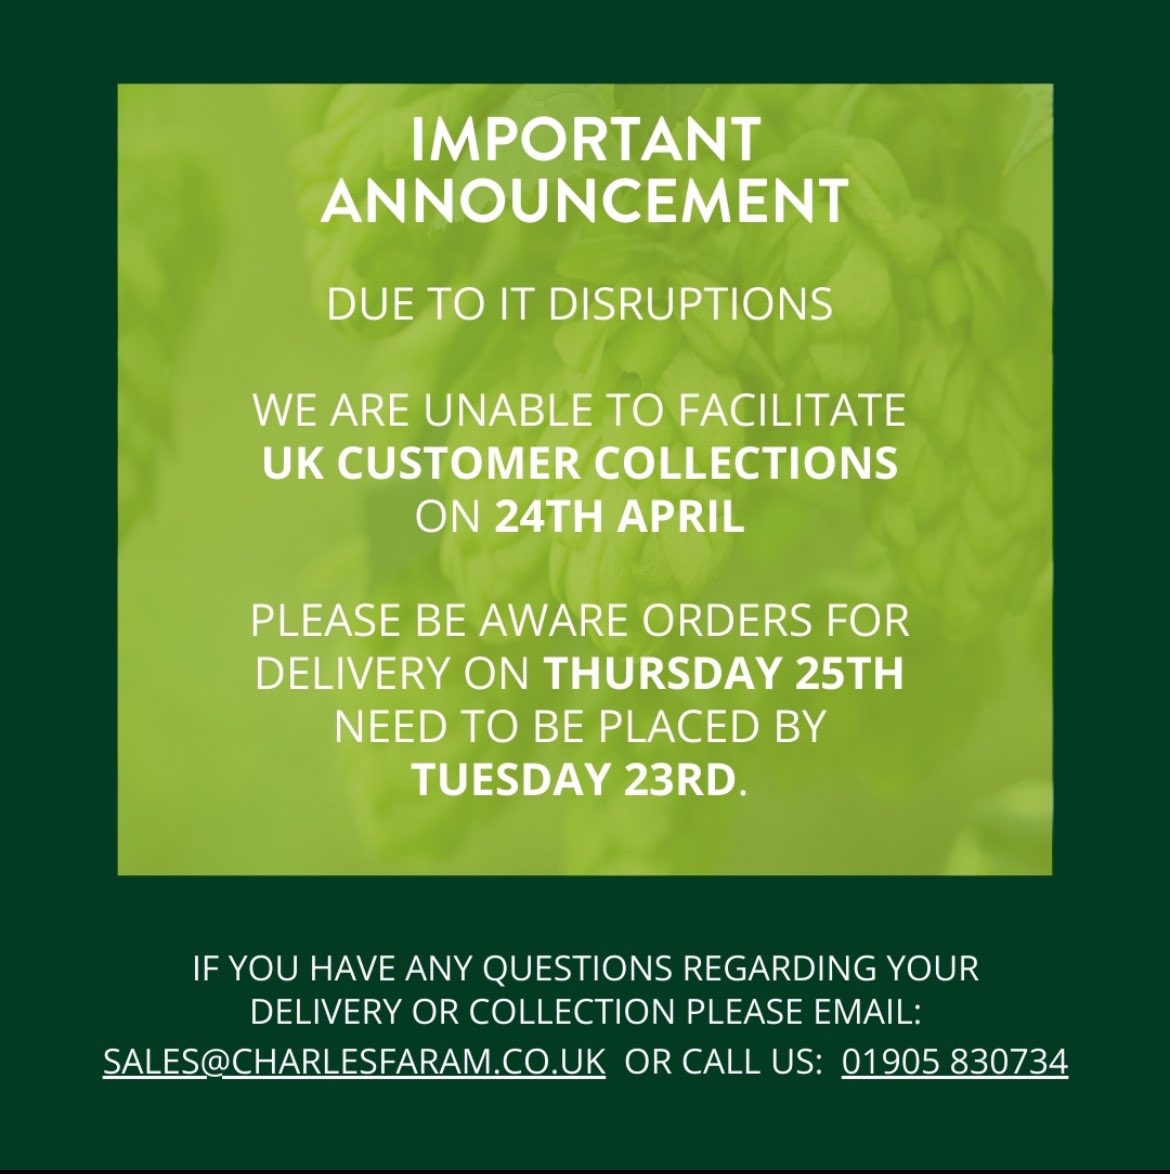 *IMPORTANT* Due to IT disruptions 💻 there will be no UK customer collections from Charles Faram on 24th April! Also please be aware that orders for delivery on Thursday 25th need to be placed by Tuesday 23rd So order early to avoid disappointment 💚🌱